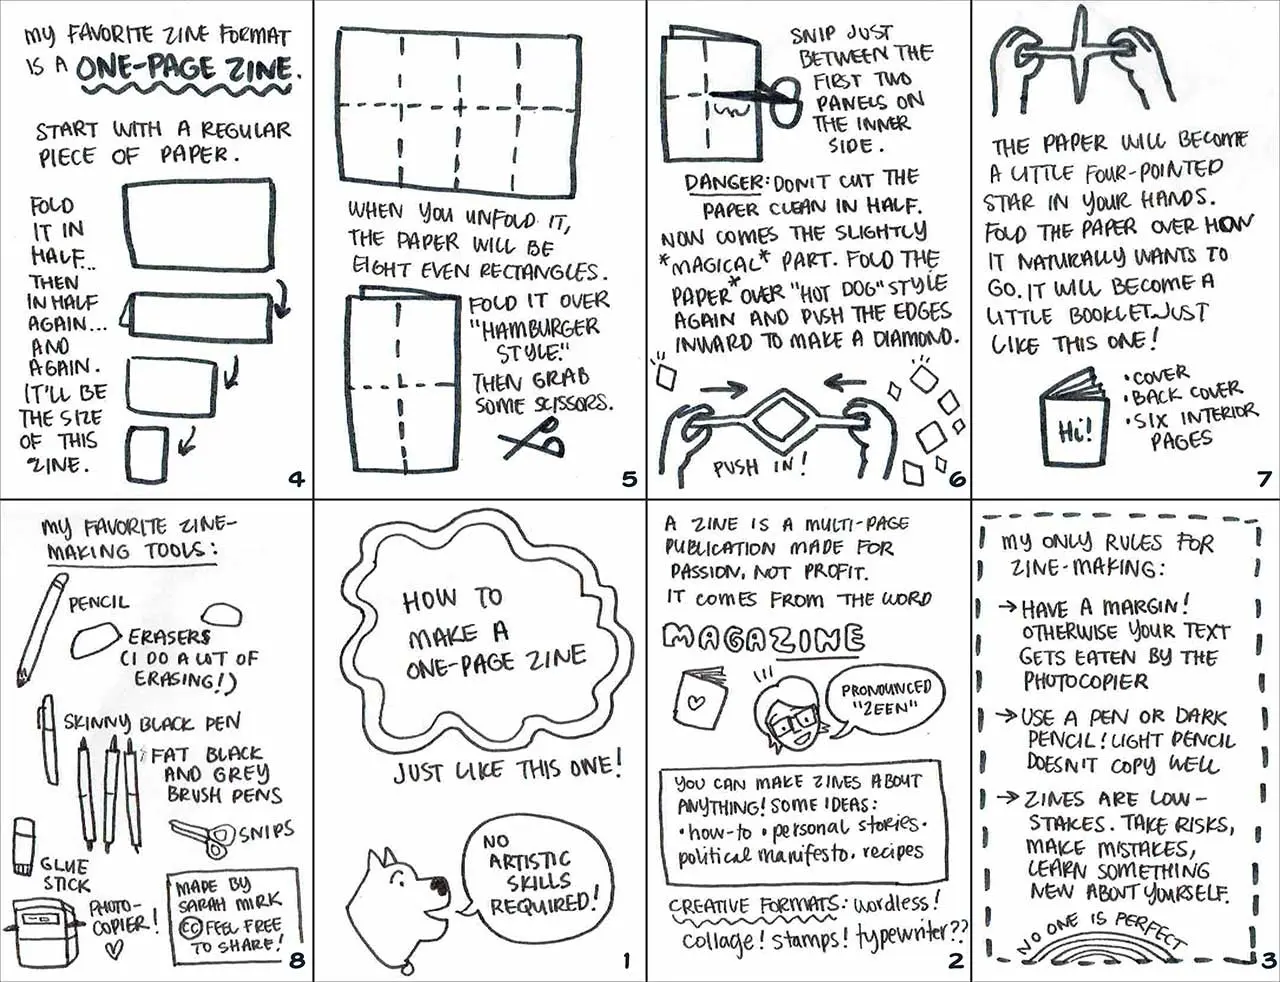 8 illustrated panels on a page showing instructions on how to make a one-page zine. The long description below has the instructions.